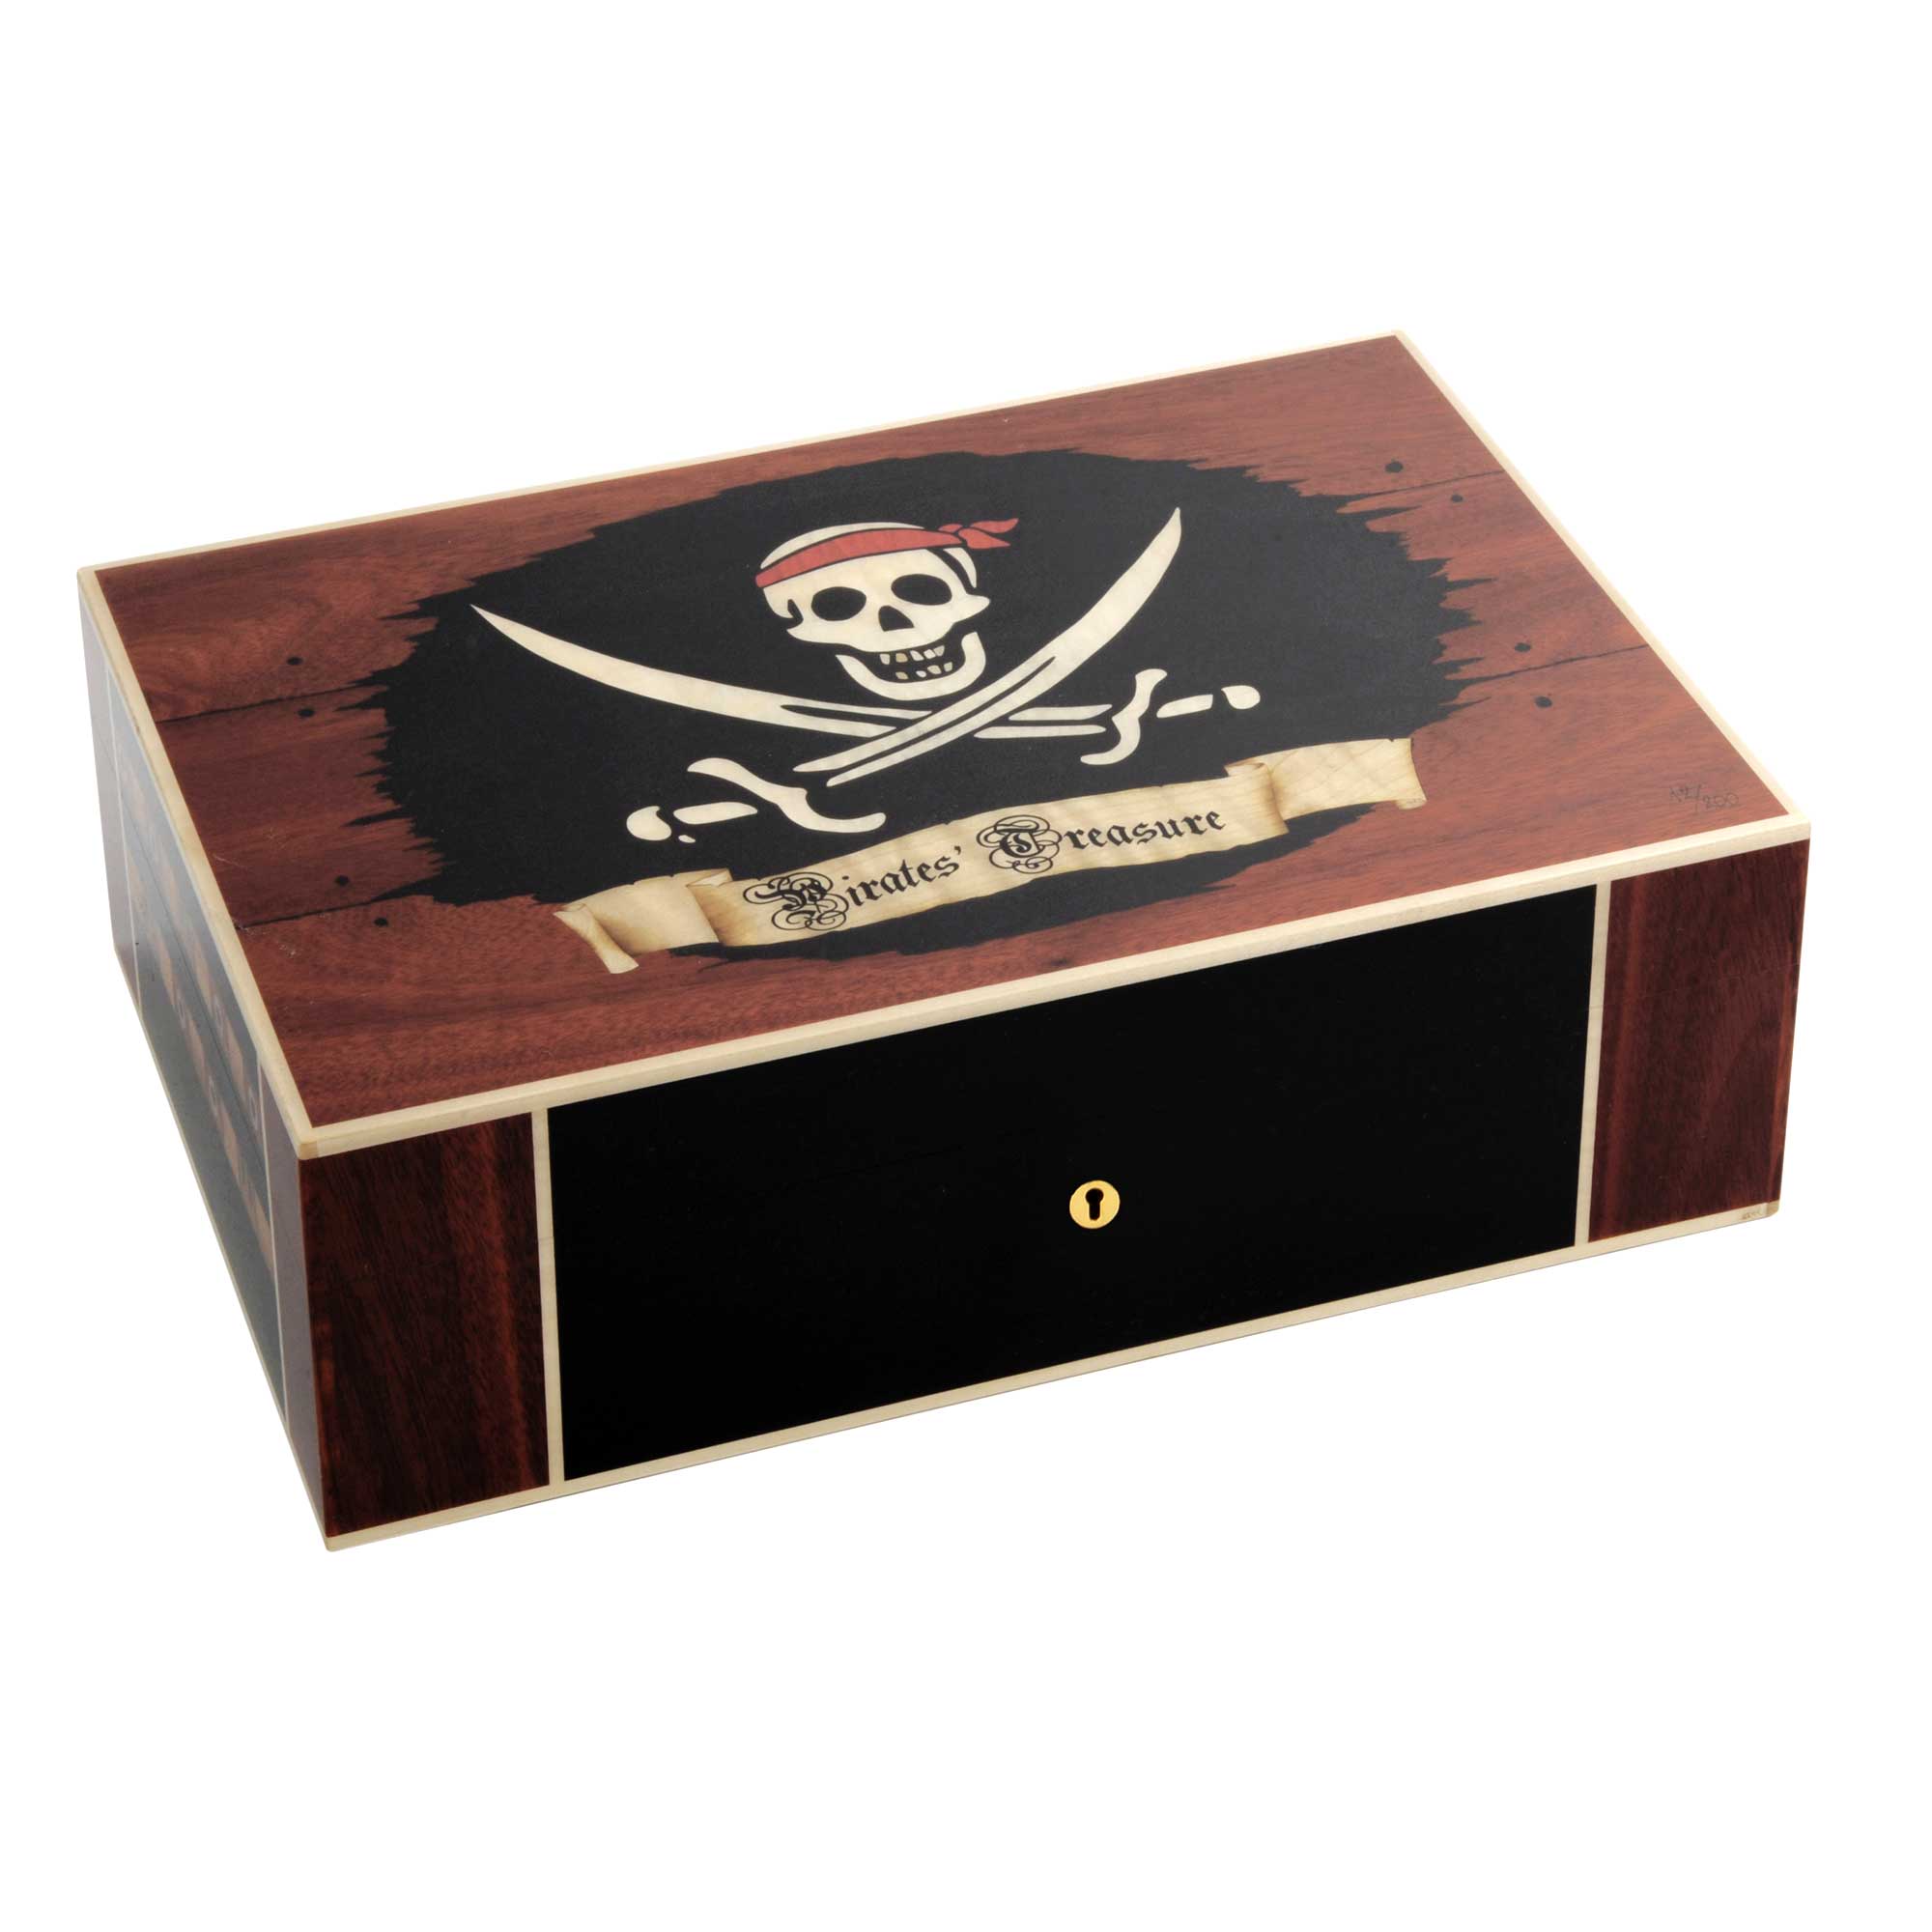 "Pirate" Limited Edition - 110, 200 & 500 Cigars